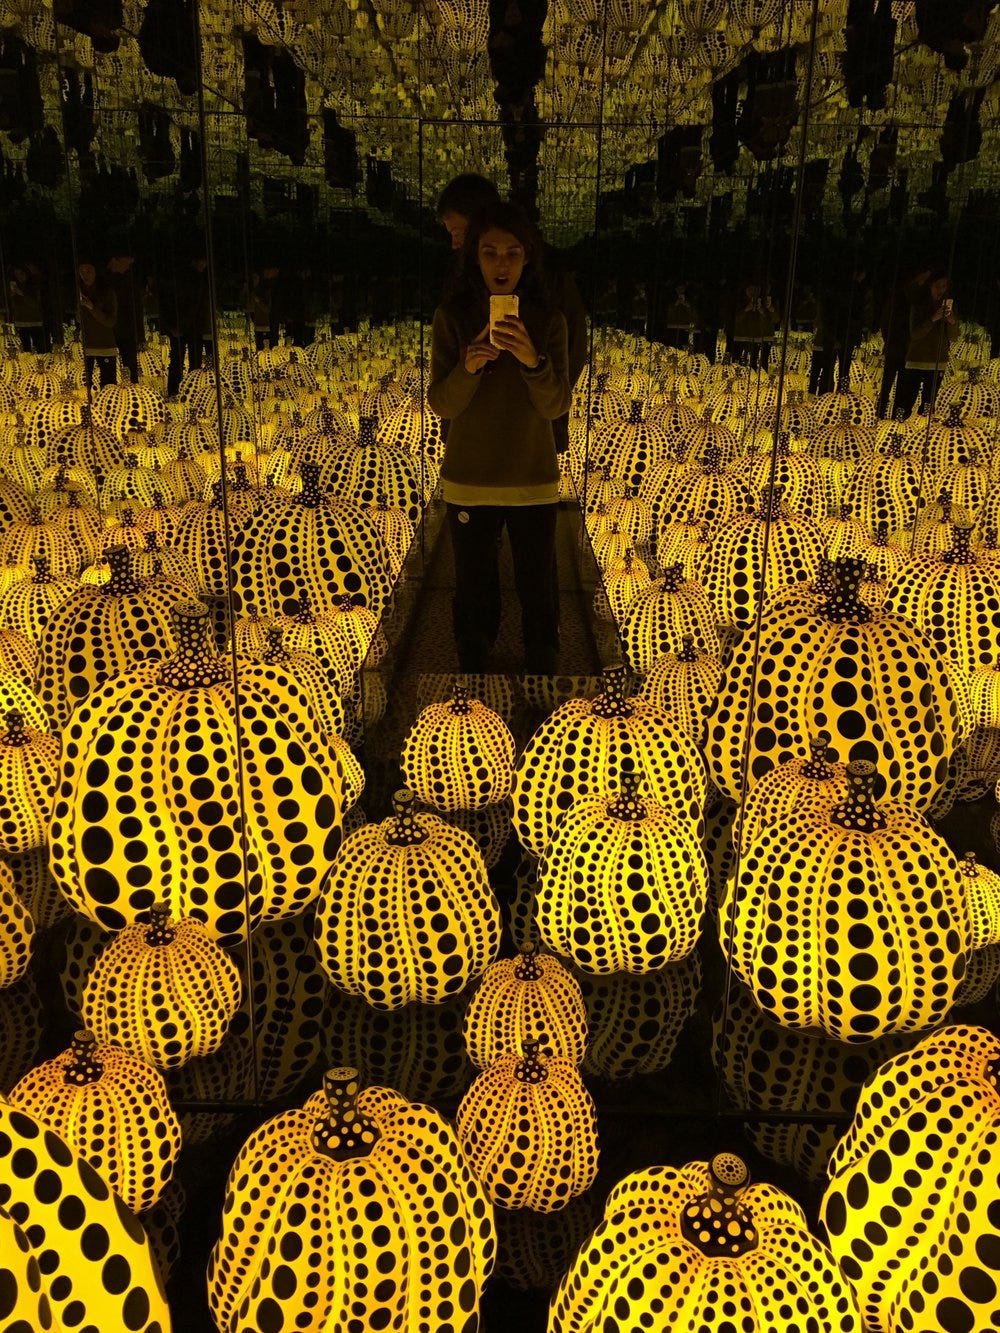 Yayoi Kusama, All the Eternal Love I have for the Pumpkins, 2016